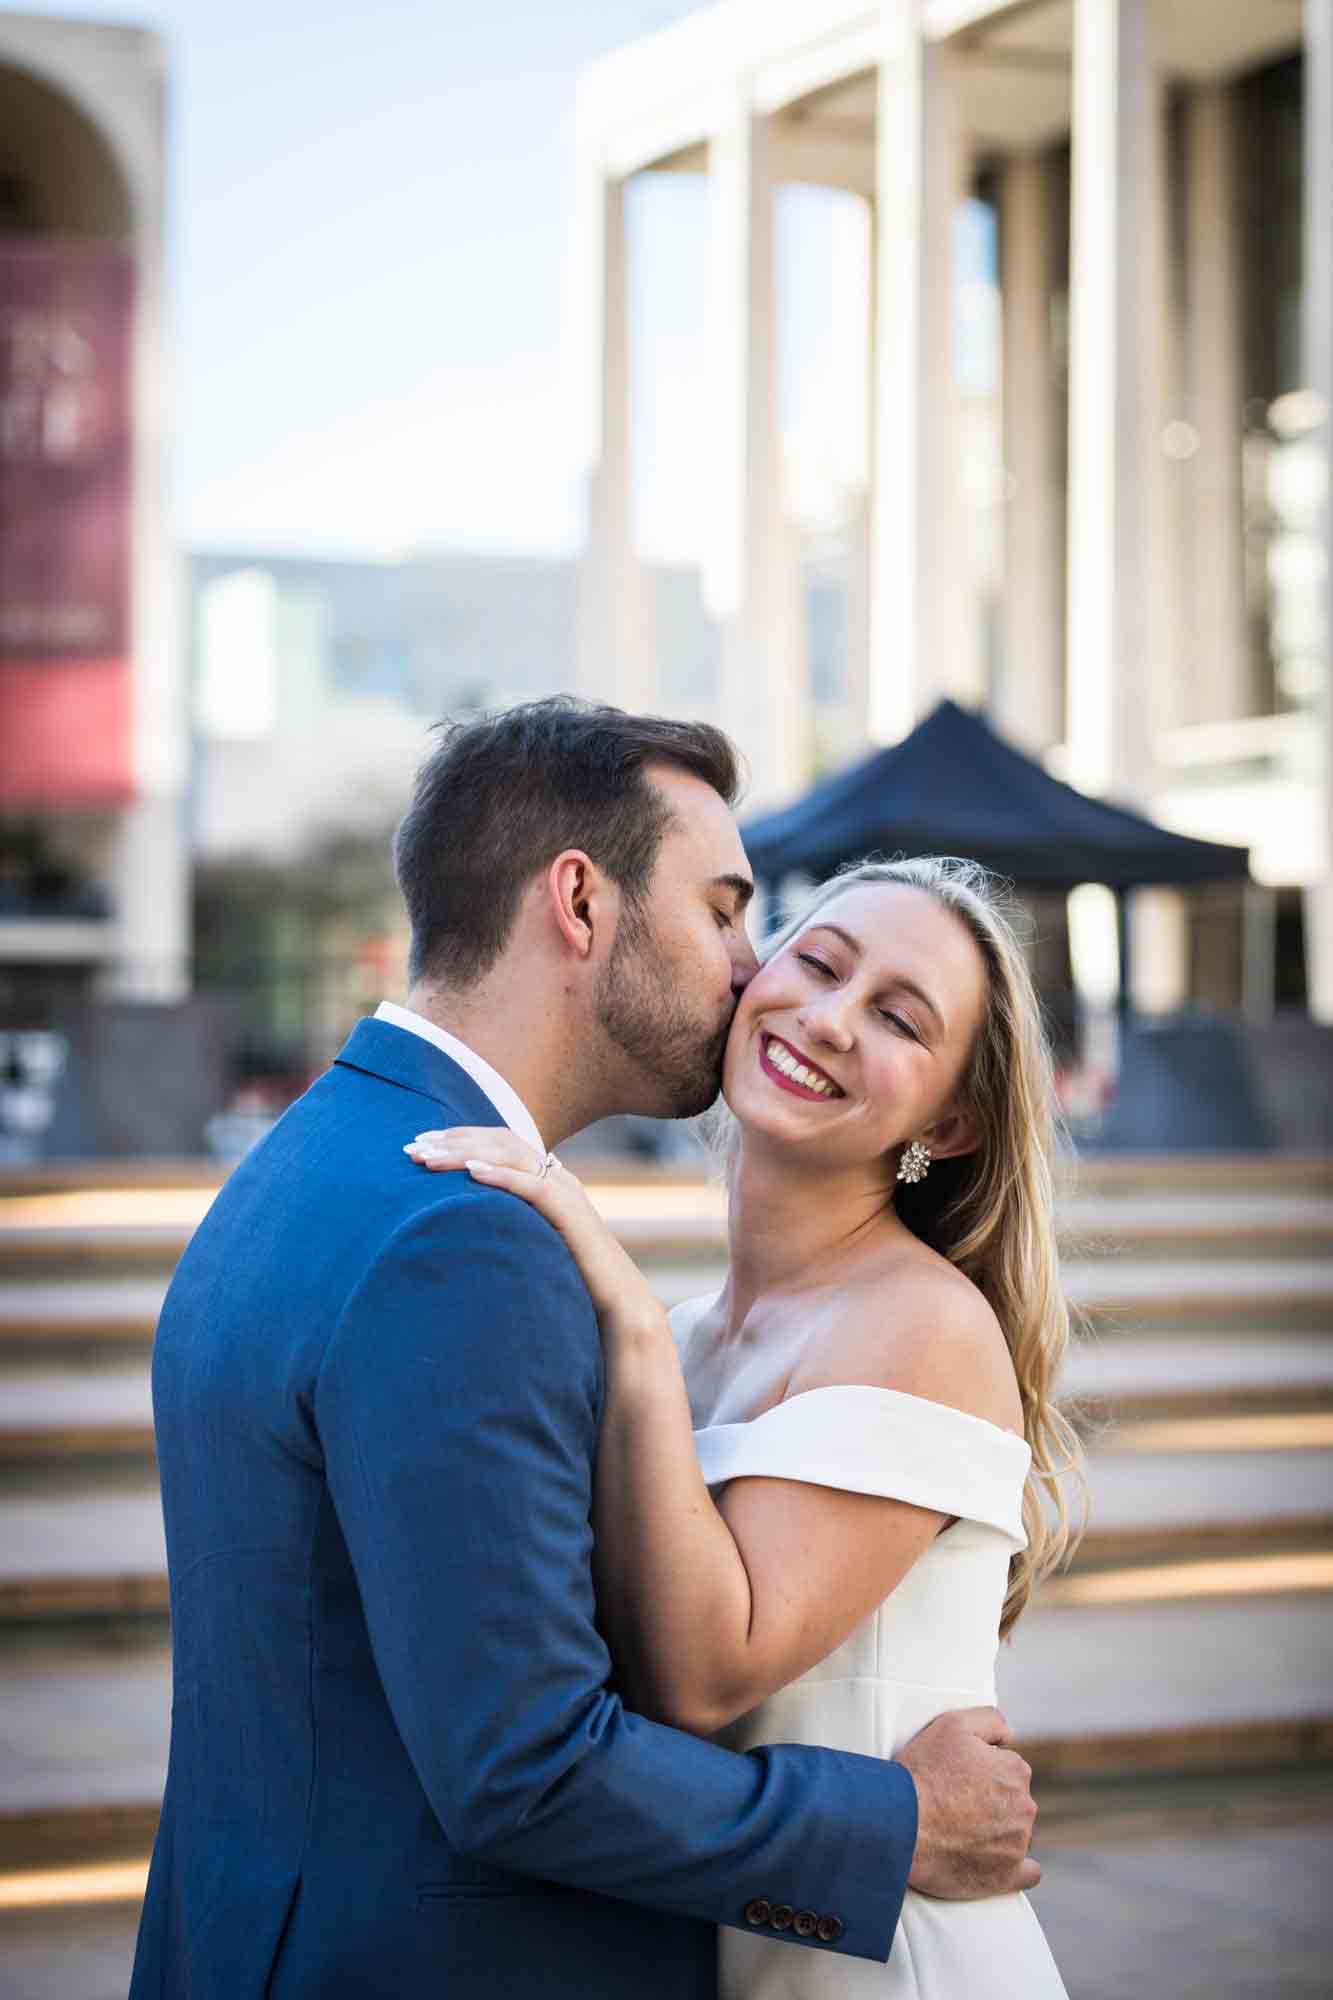 Groom kissing bride on the cheek in front of Lincoln Plaza